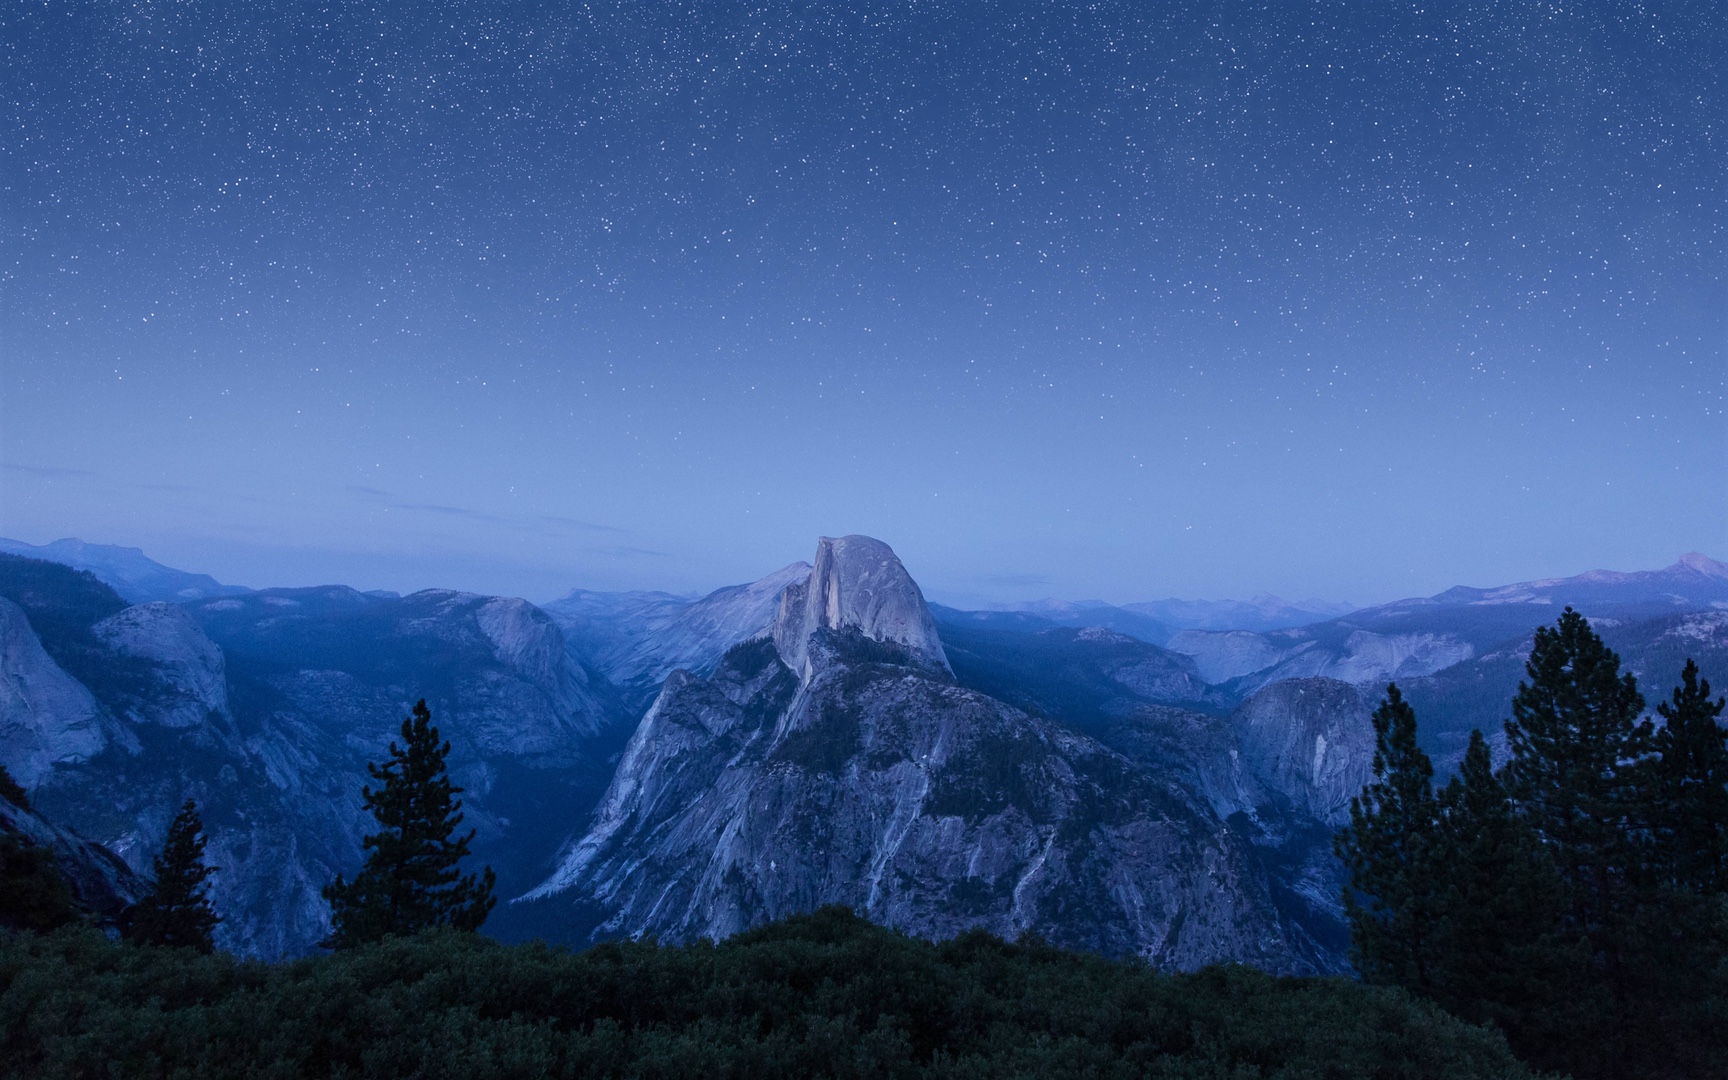 Archive Os X El Capitan Wallpaper The Most Beautiful Yet